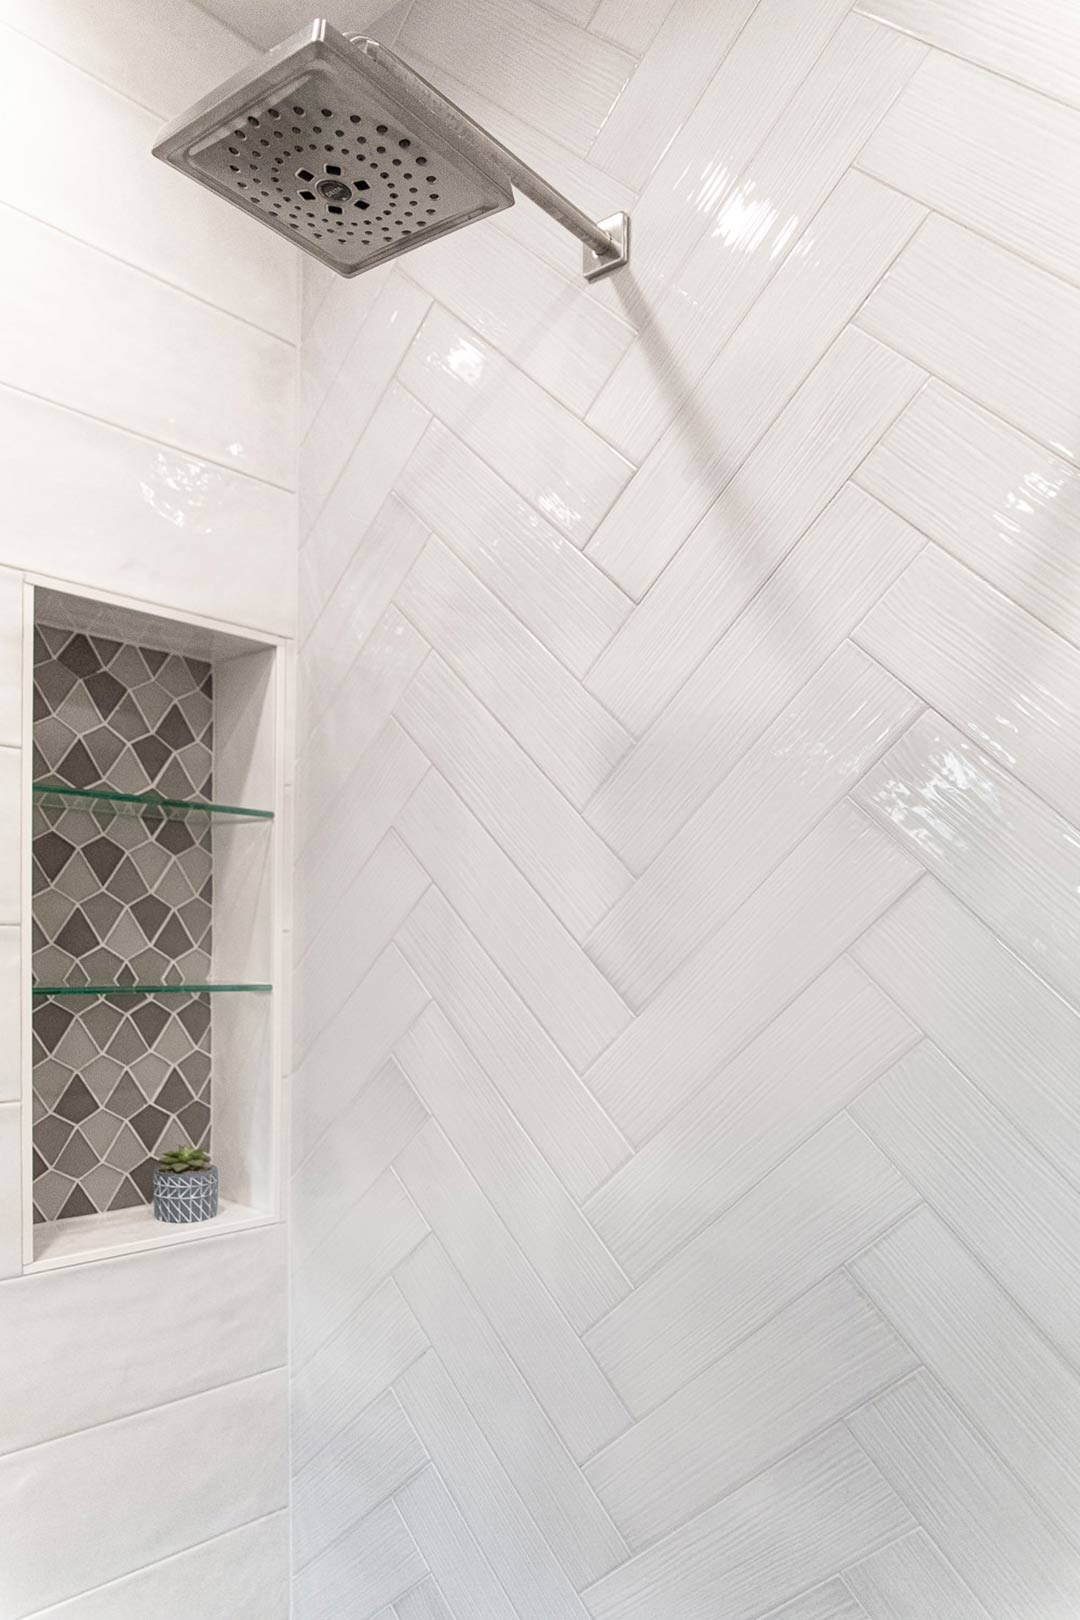 Herringbone accent wall and custom tiled shower niche installed in-house by Freestone Design-Build